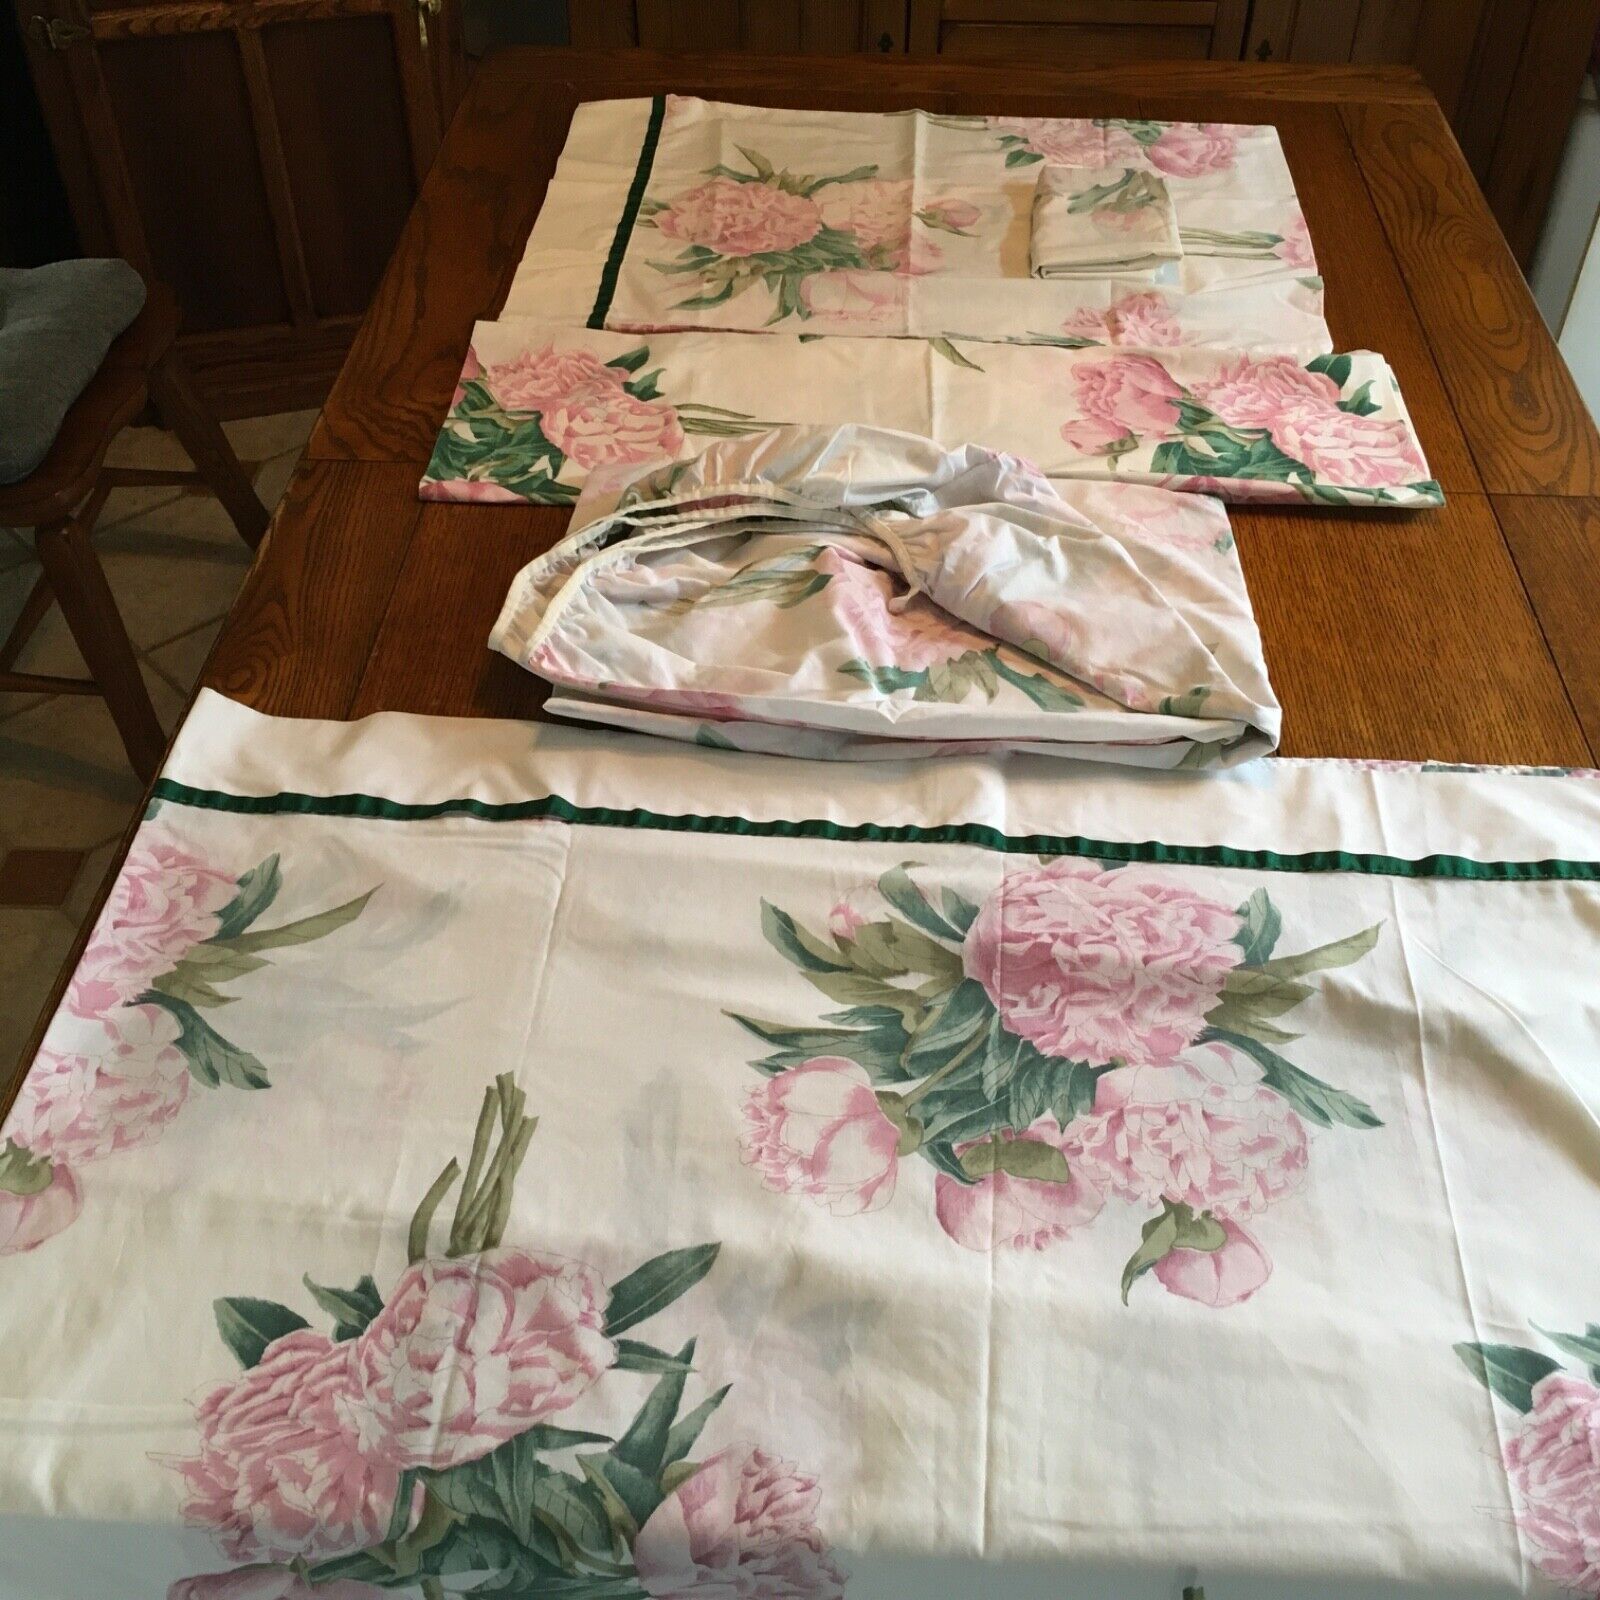 Martex vintage full size sheet set with large floral print pink green on white